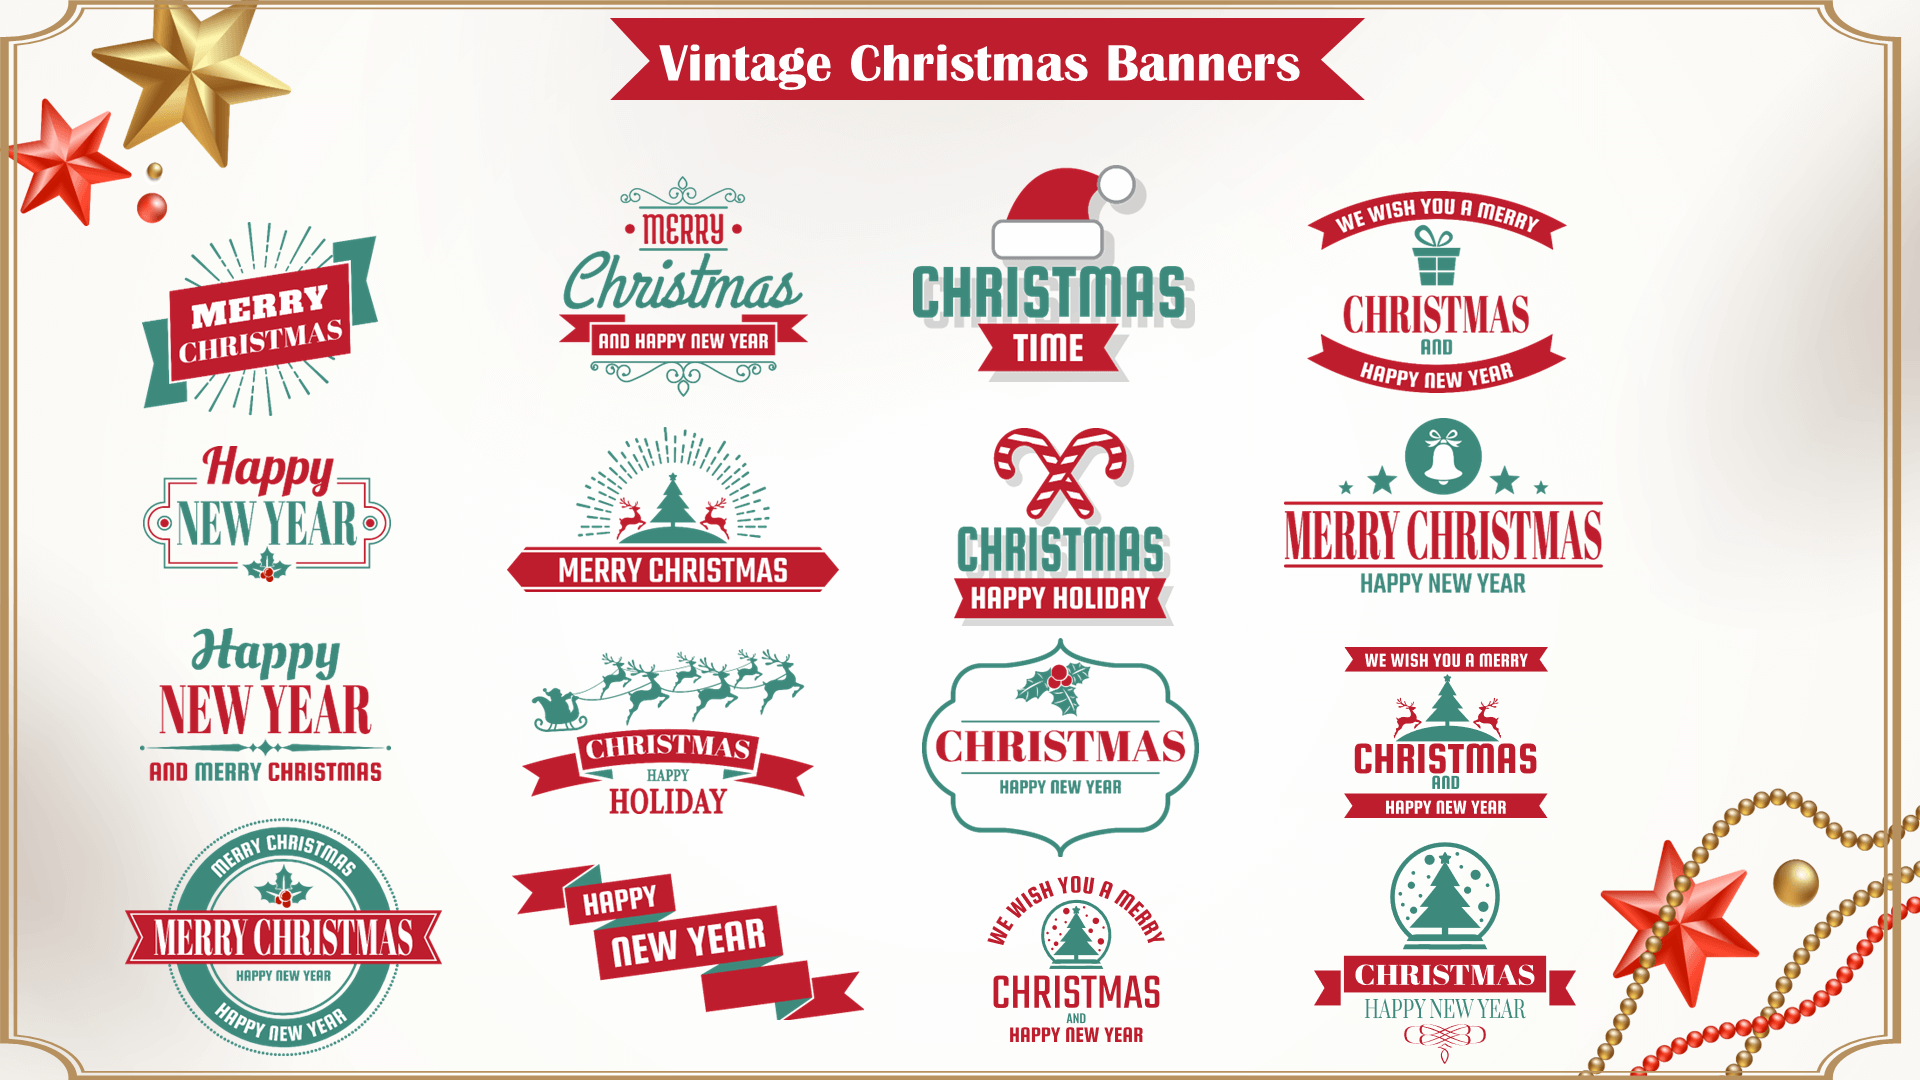 Vintage_banners2